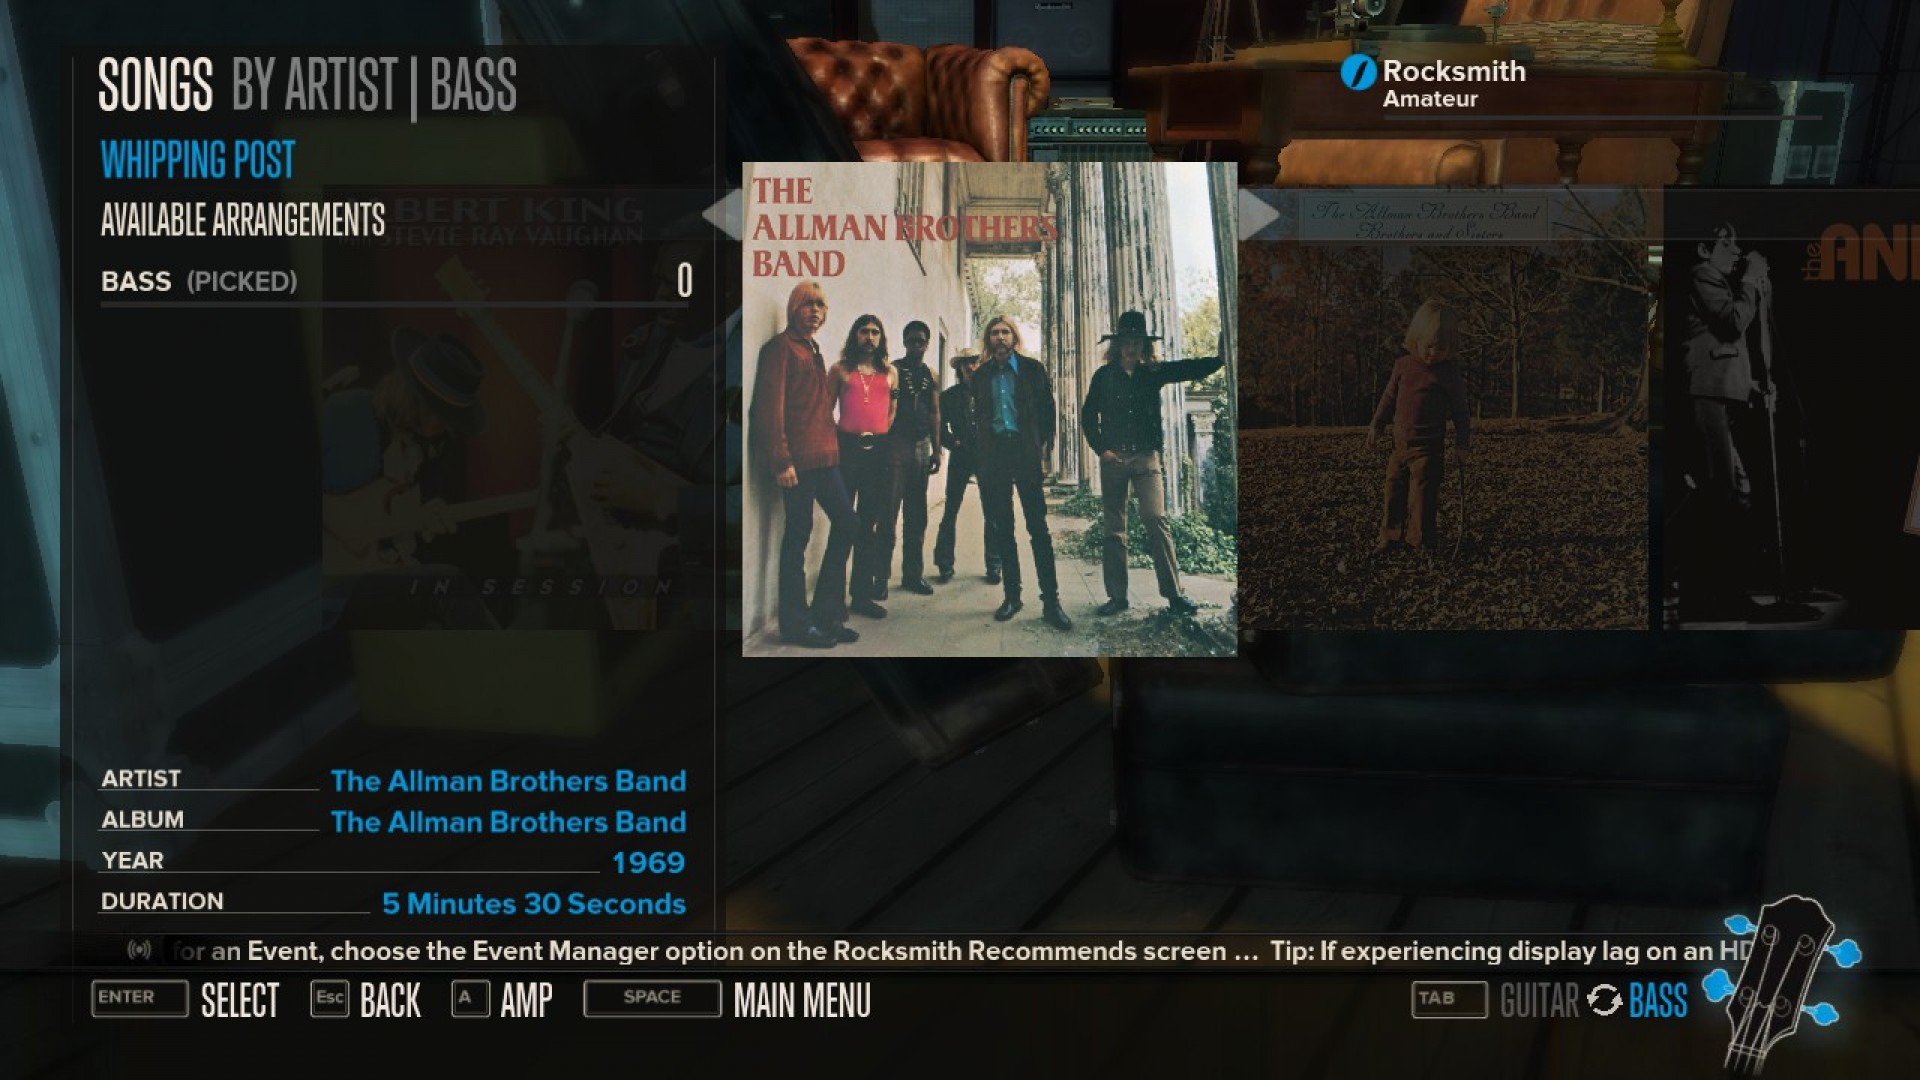 Rocksmith - The Allman Brothers Band - Whipping Post screenshot